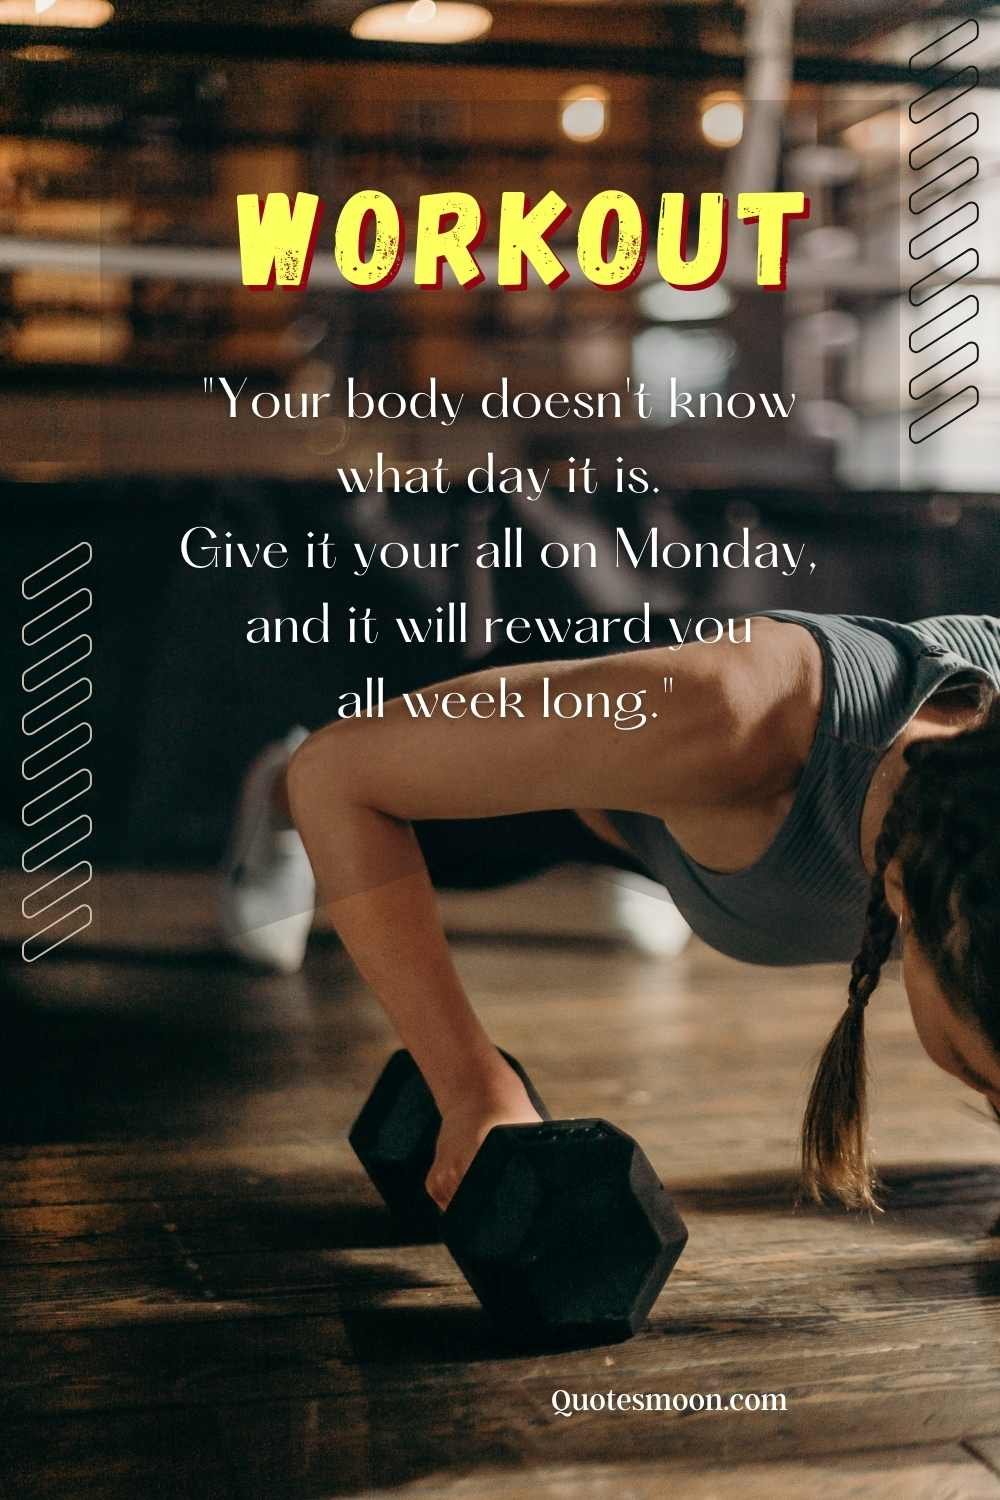 monday Best Fitness and Workout Quotes images